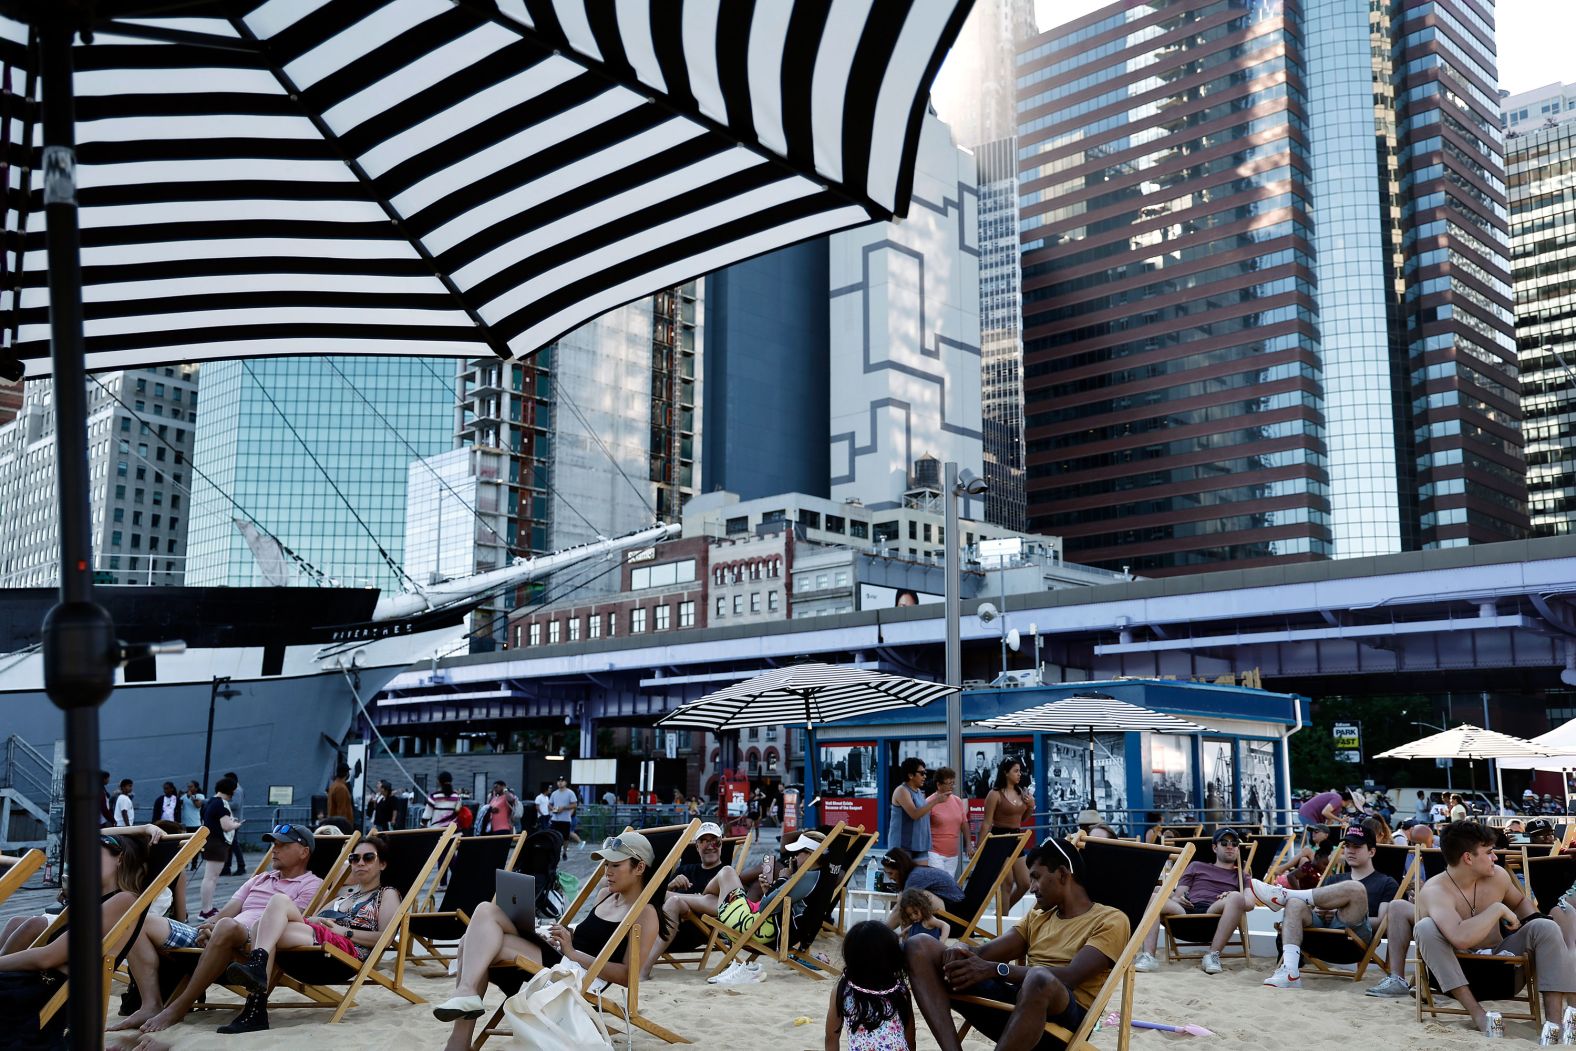 People relax on a makeshift beach at the South Street Seaport in New York on Sunday.